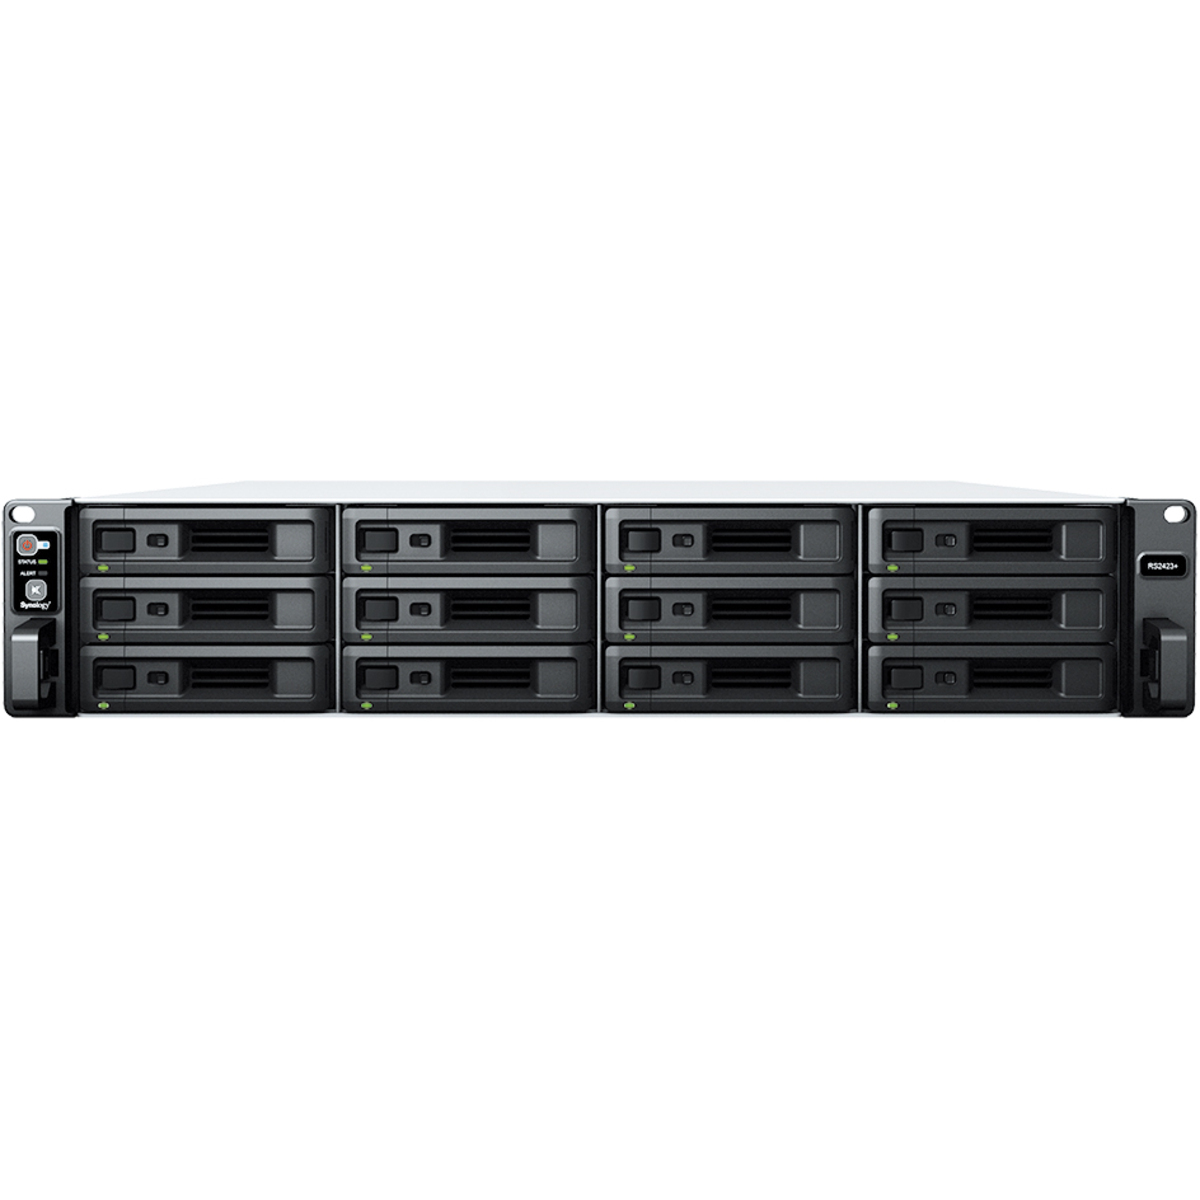 Synology RackStation RS2423RP+ 24tb 12-Bay RackMount Multimedia / Power User / Business NAS - Network Attached Storage Device 12x2tb Seagate BarraCuda ST2000DM008 3.5 7200rpm SATA 6Gb/s HDD CONSUMER Class Drives Installed - Burn-In Tested - FREE RAM UPGRADE RackStation RS2423RP+